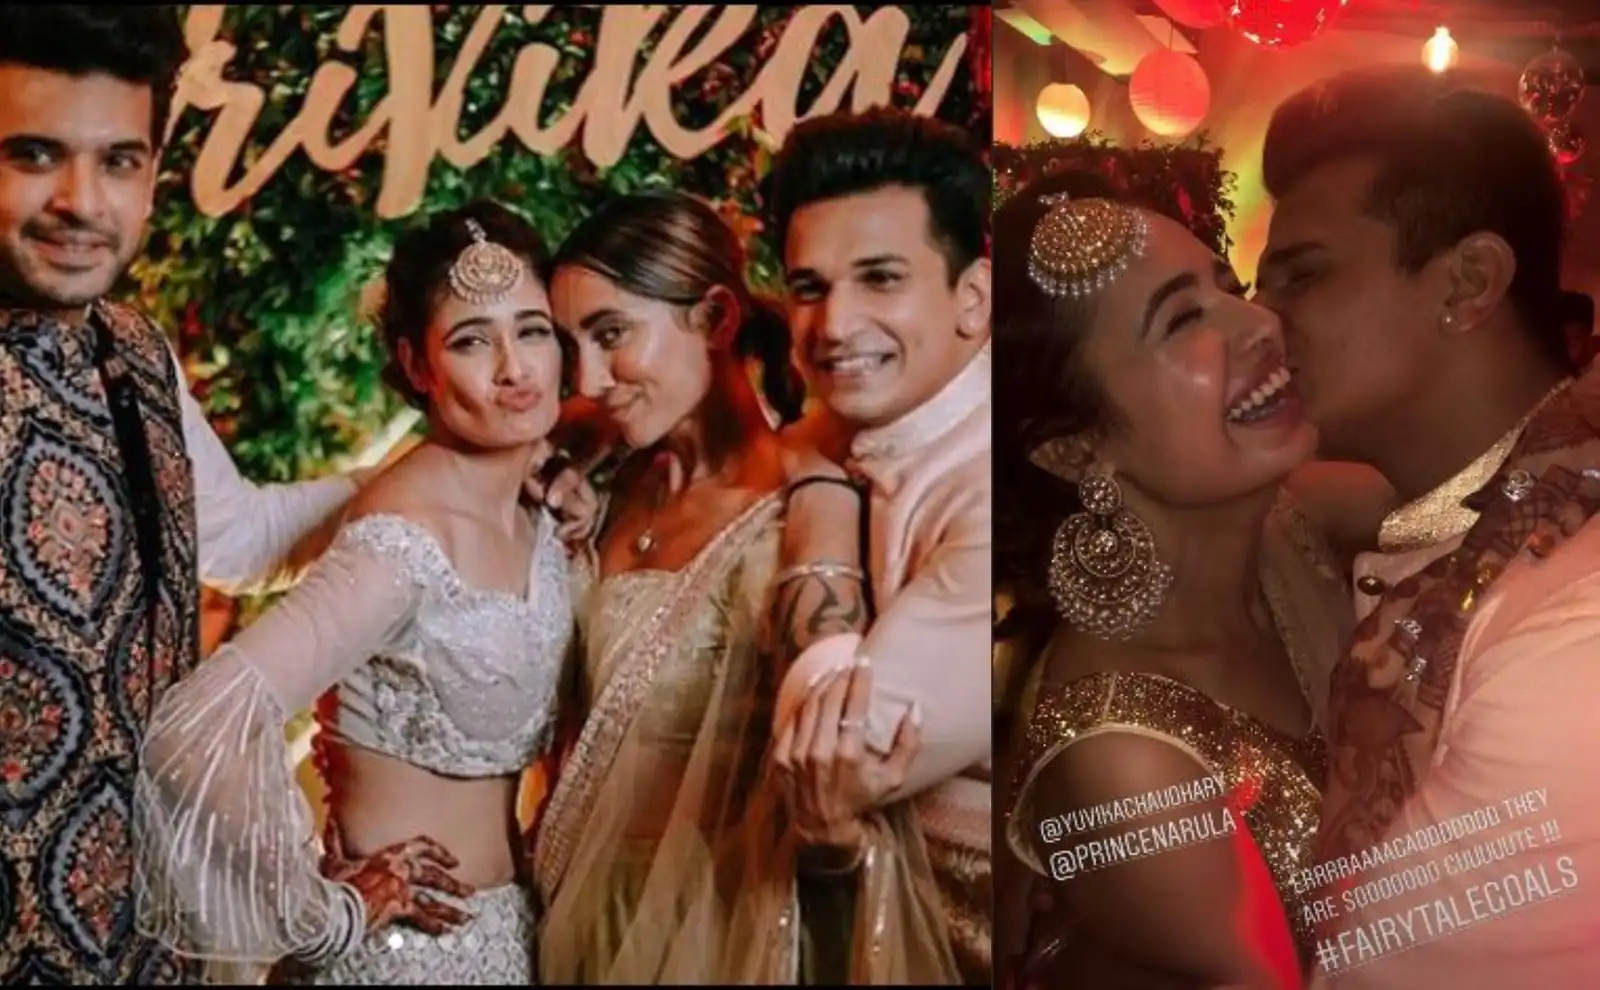 Prince Narula And Yuvika Chaudhary's Sangeet And Cocktail Party Was A Star-Studded Affair!